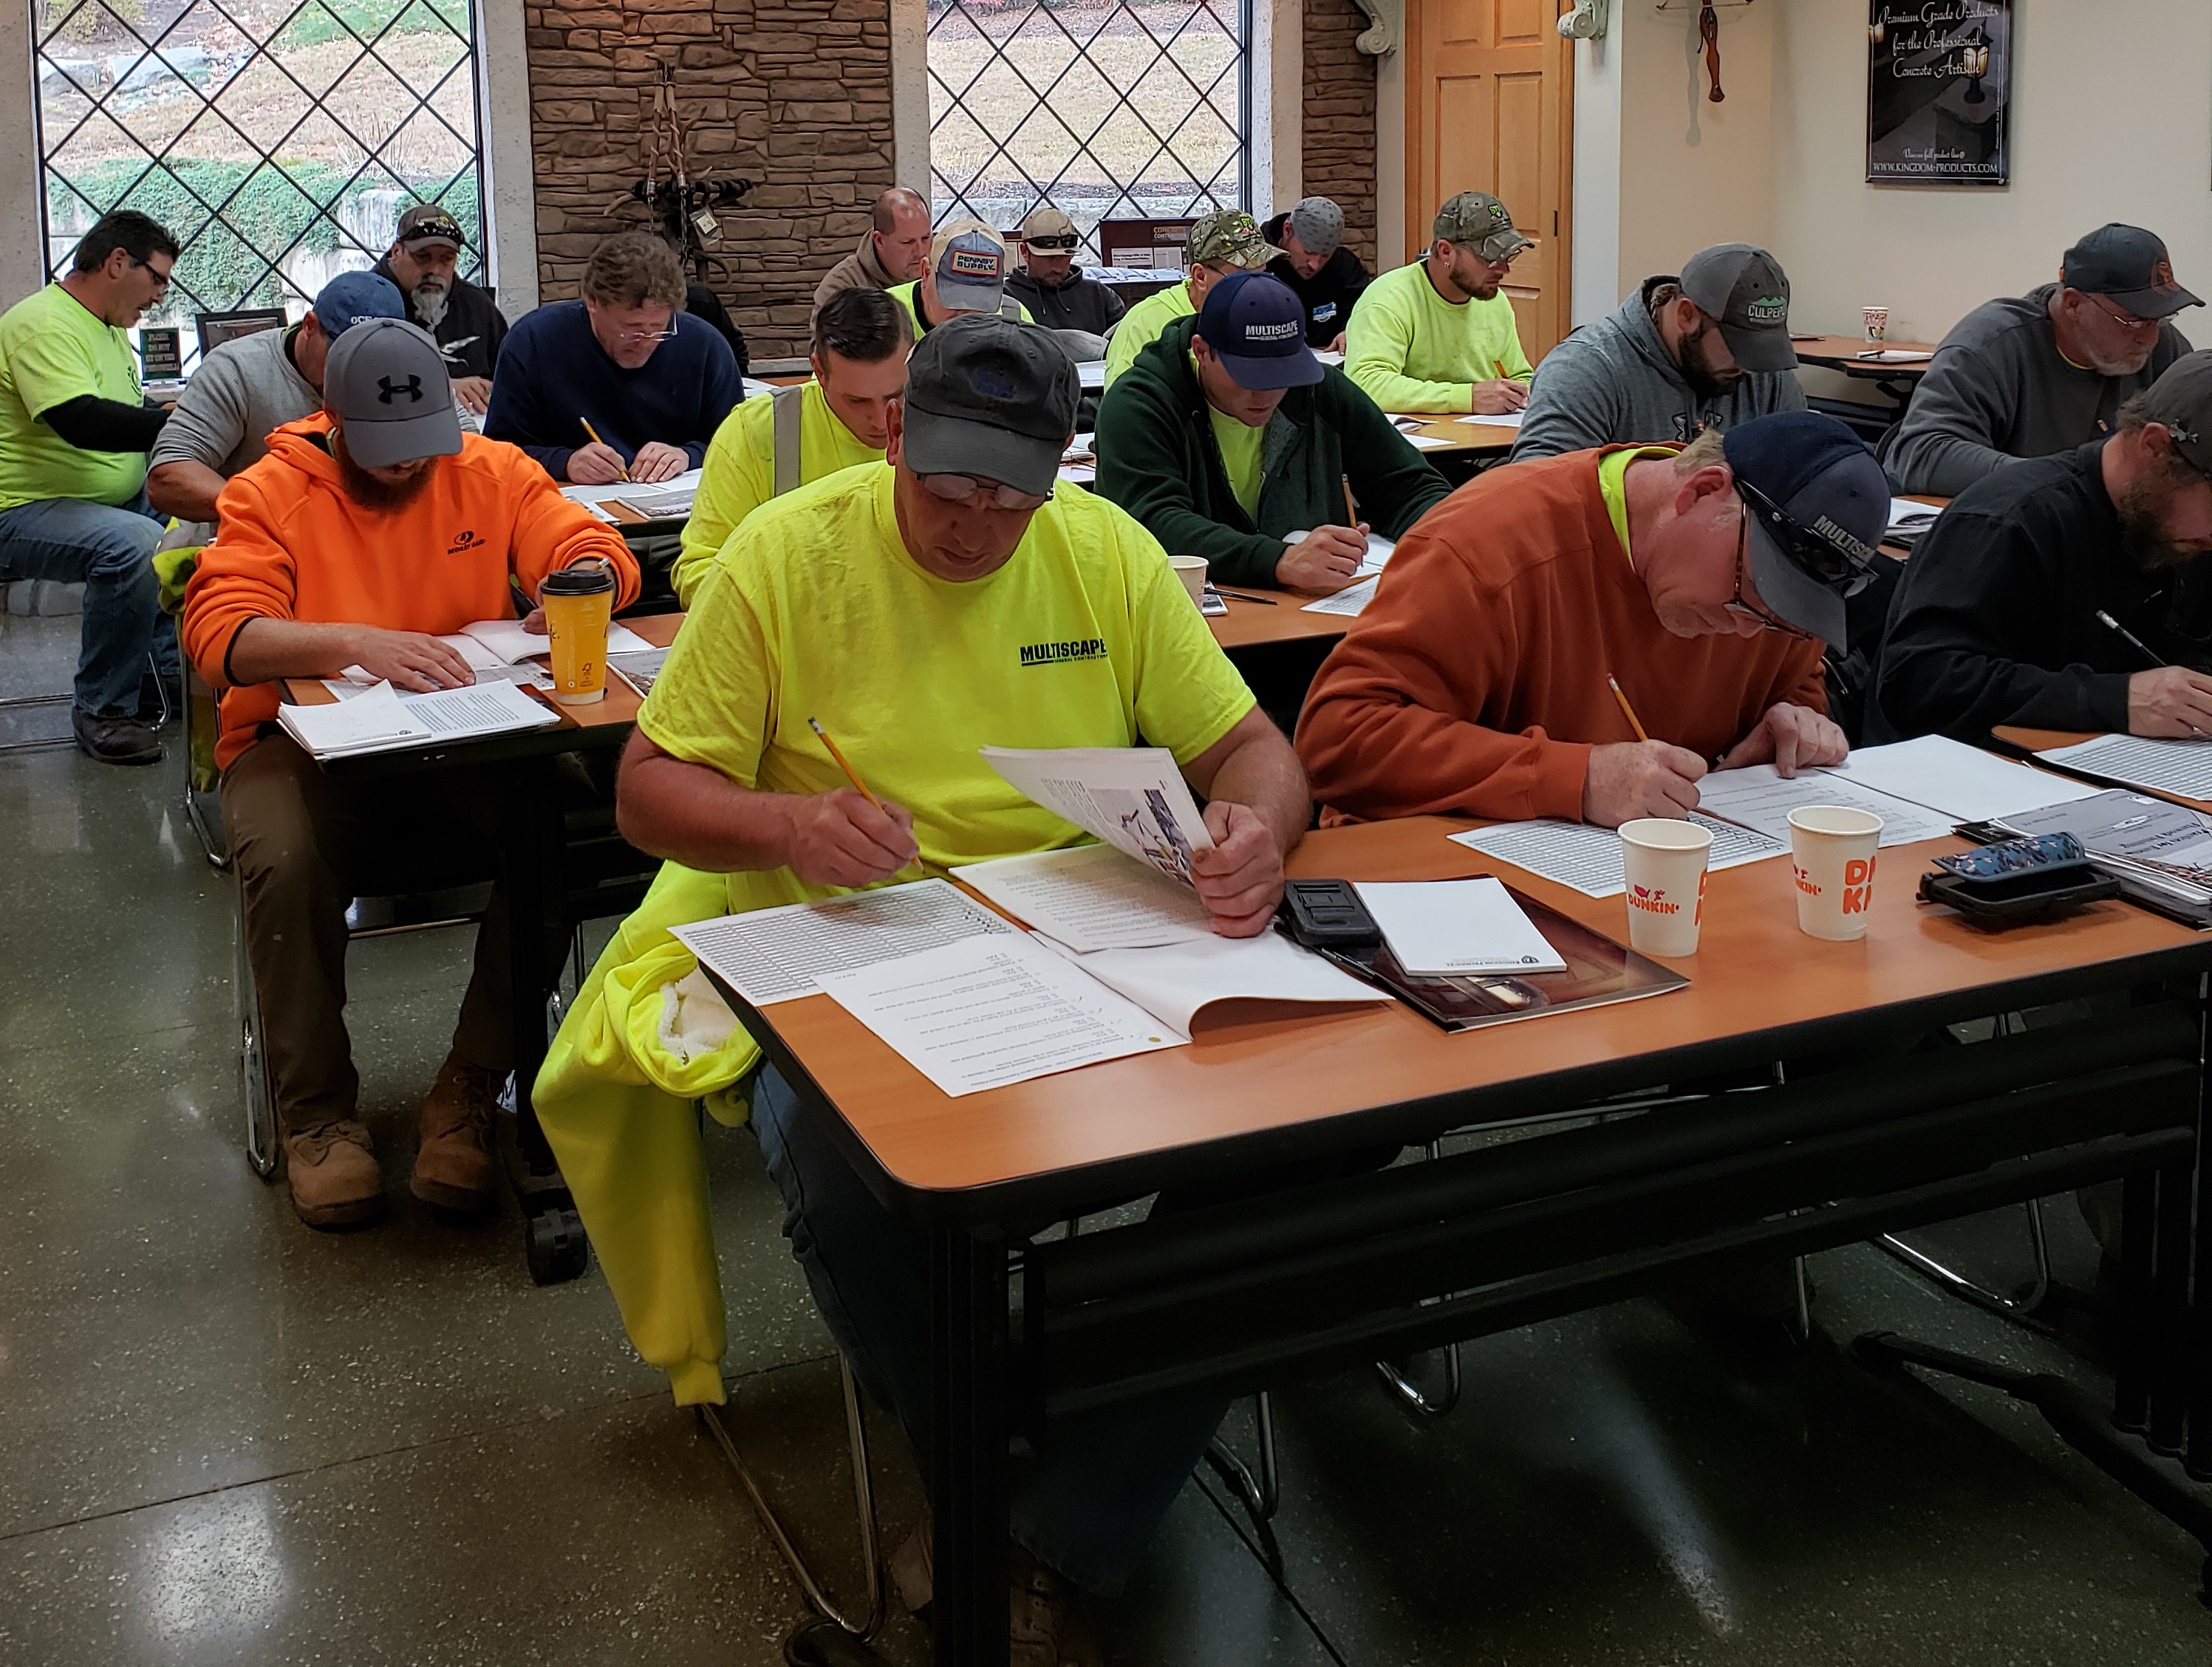 Certified Concrete Finishers Course participants sitting in classroom filling out paperwork.